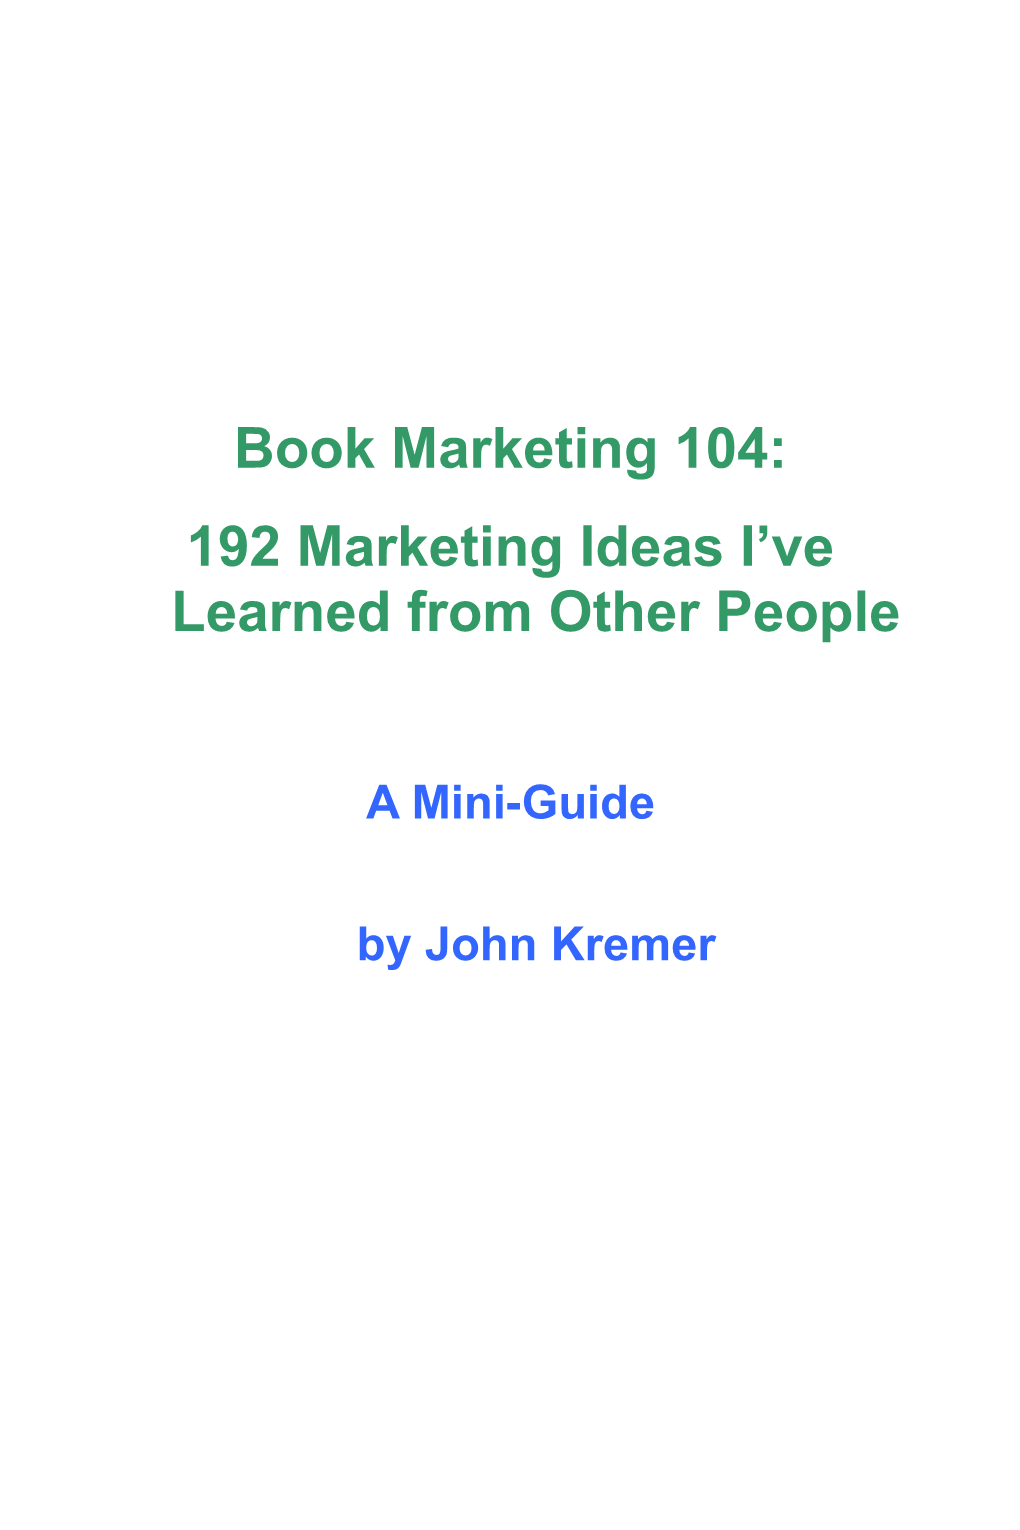 151 Marketing Ideas I've Learned from Other People